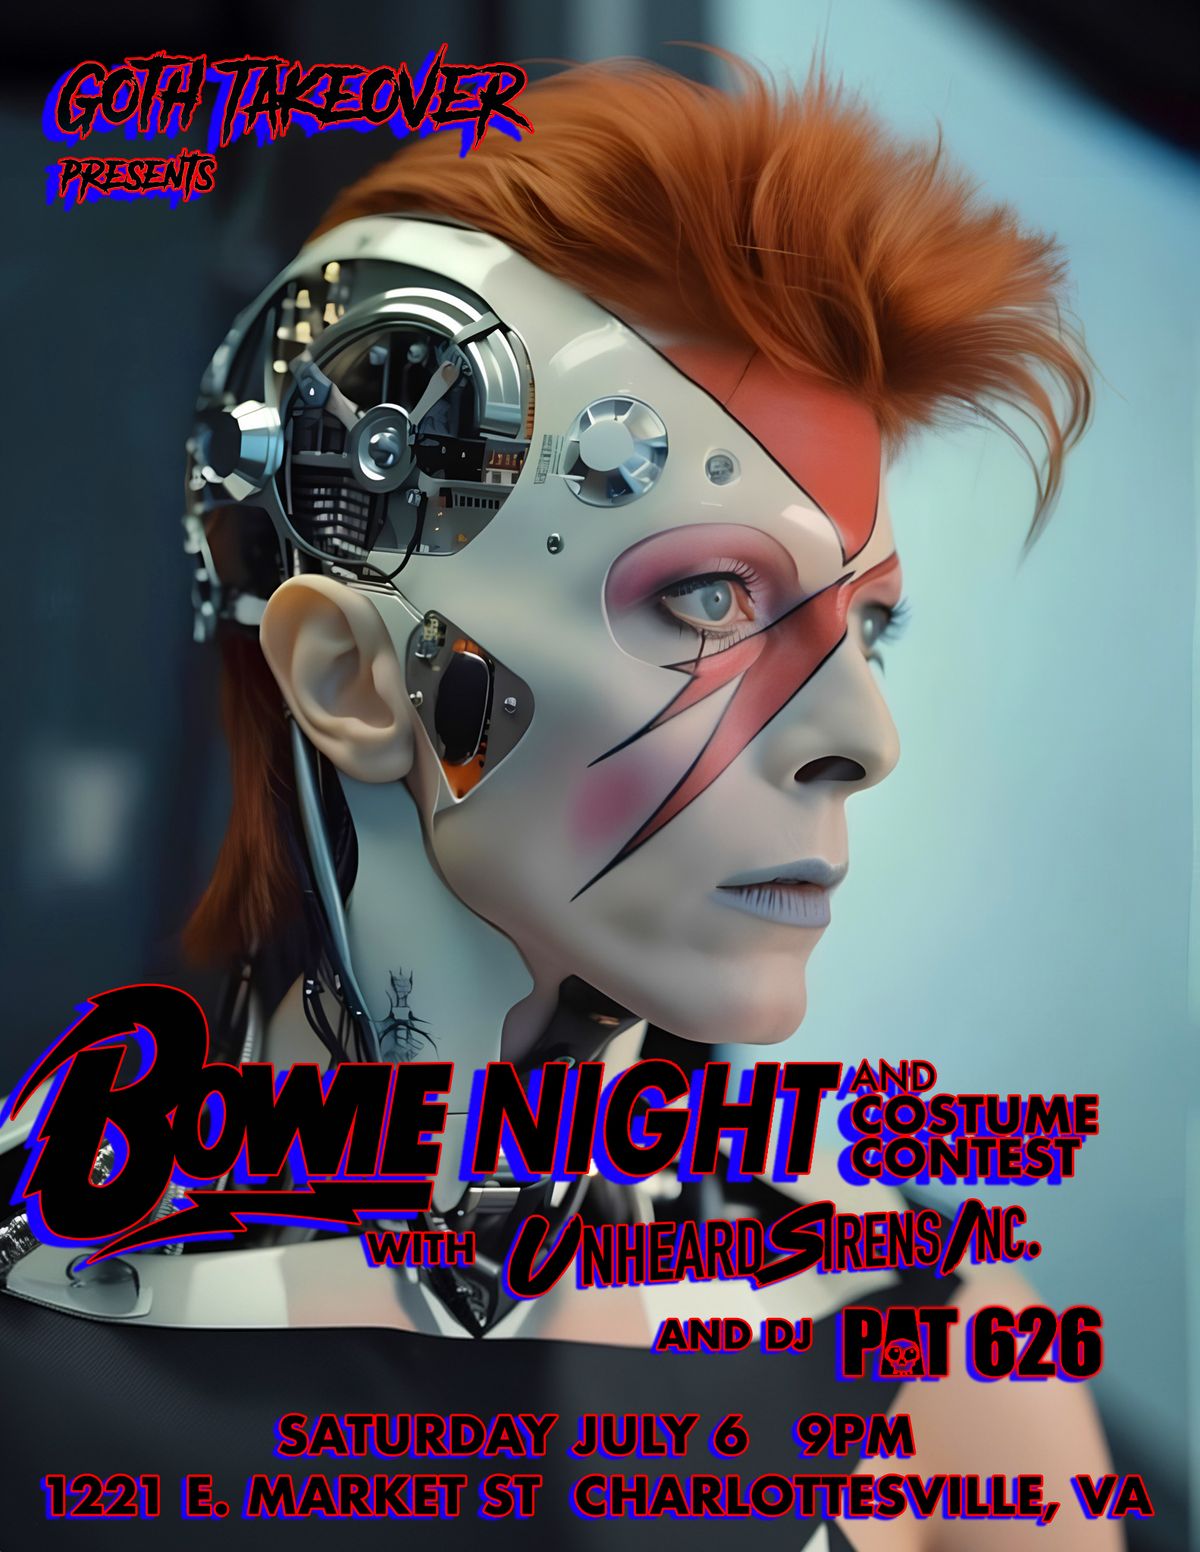 Goth Takeover presents BOWIE NIGHT with Unheard Sirens and DJ PAT626